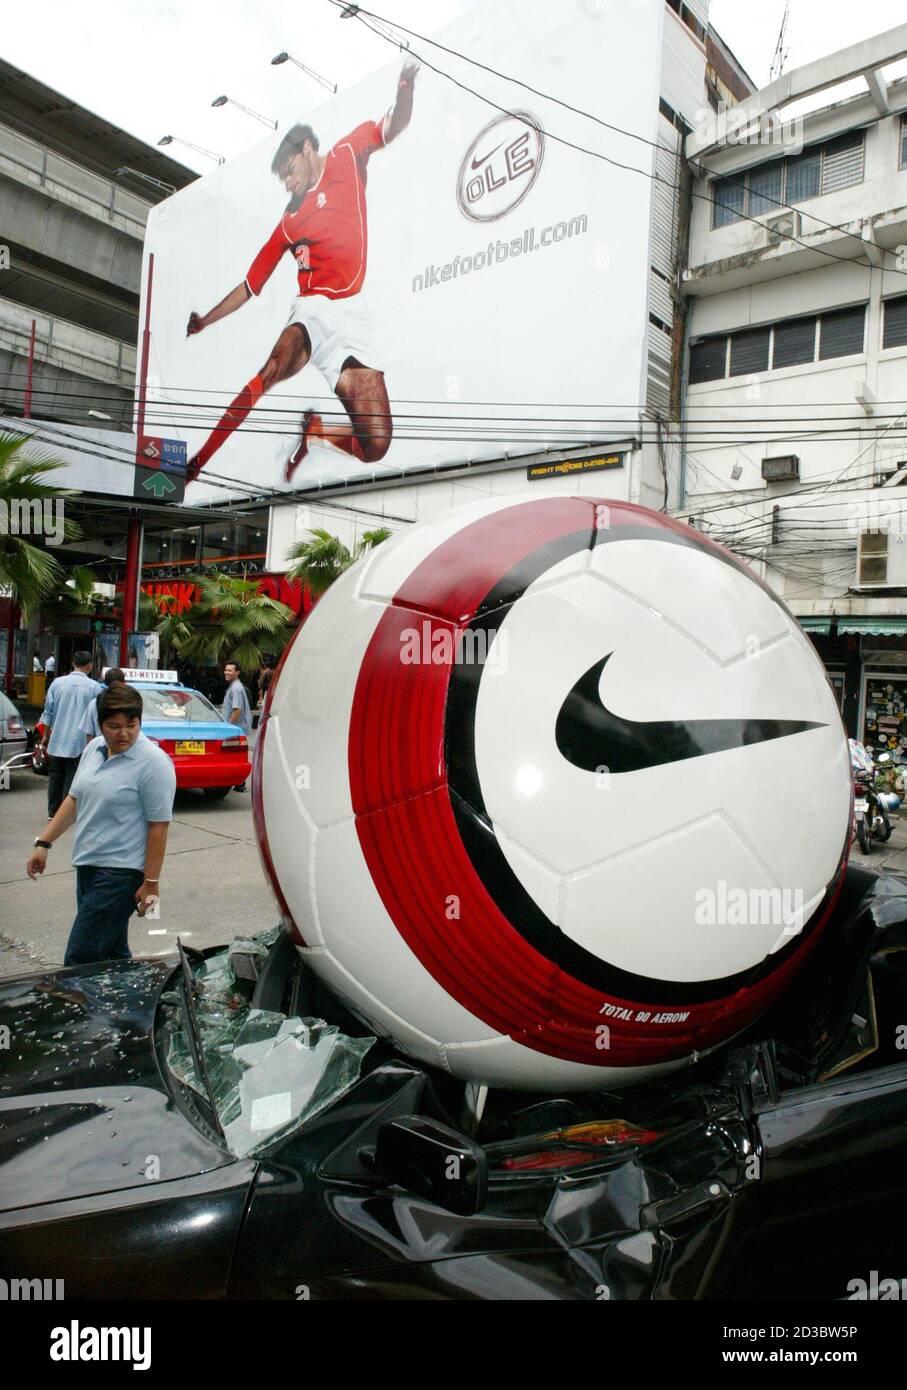 A Thai bypasser looks at a giant football sitting on top of a car in  Bangkok on May 31, 2004. The exhibit was part of a promotion for the Euro  2004 soccer